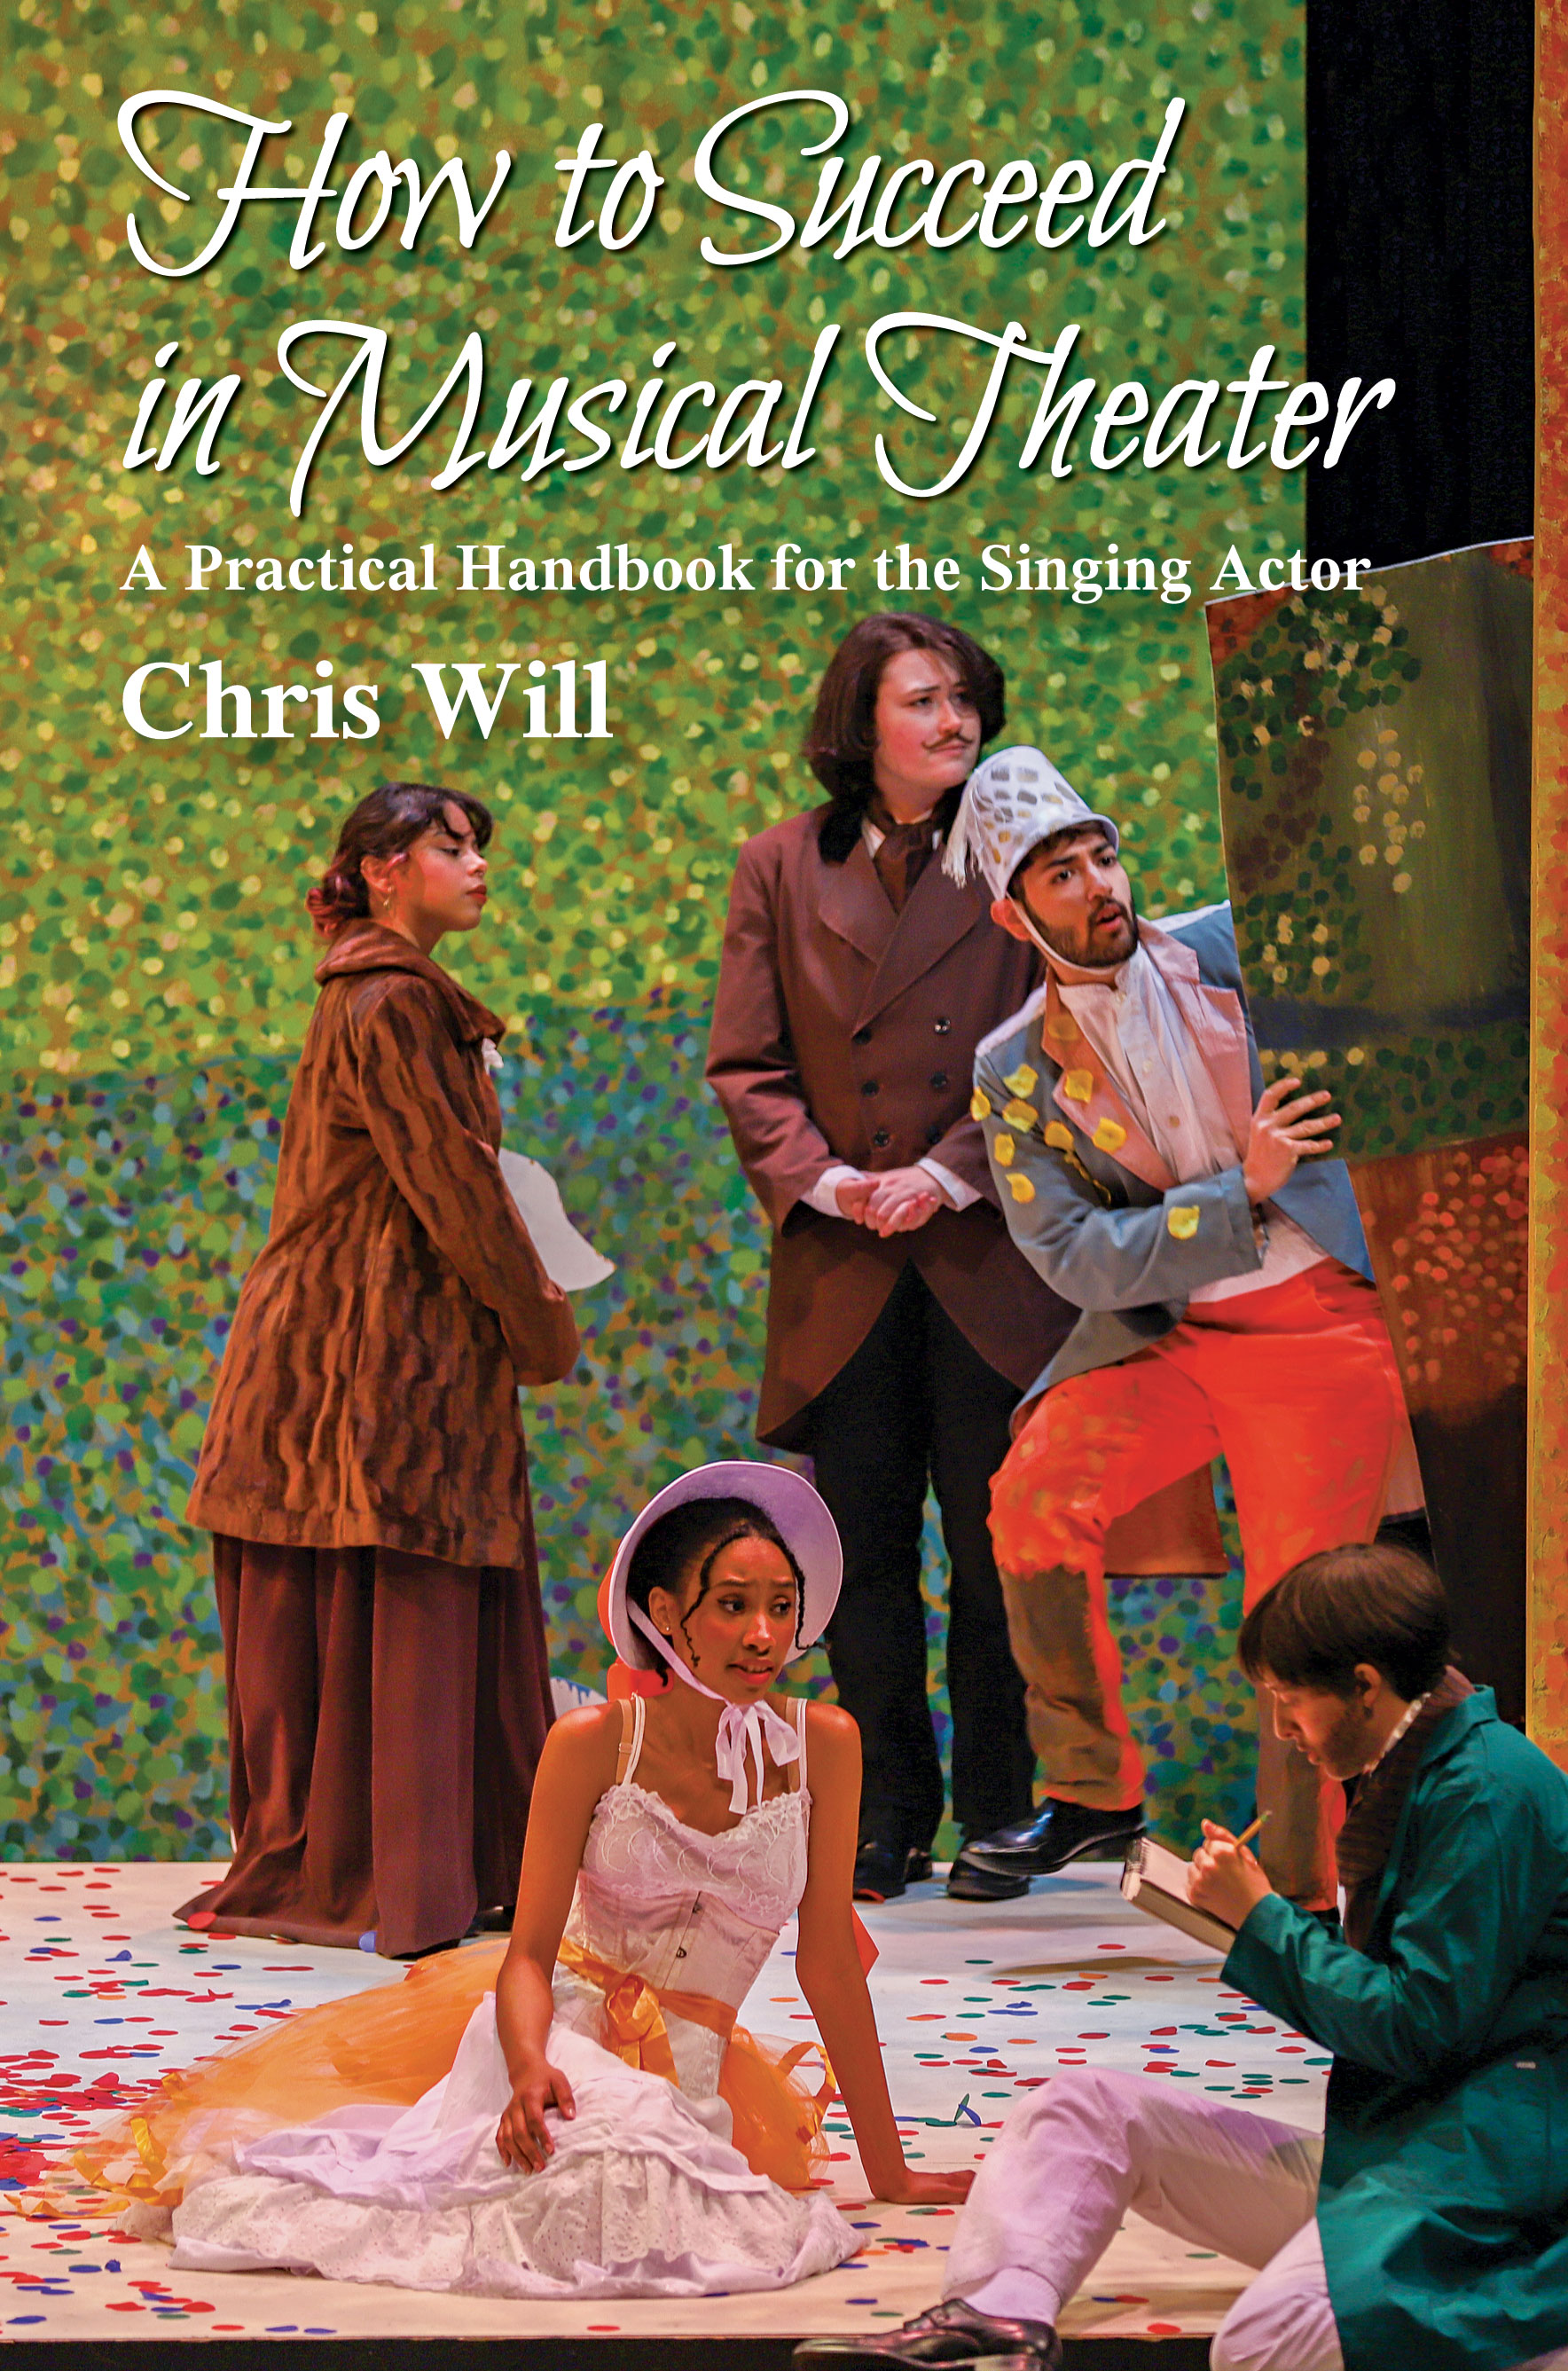 How to Succeed in Musical Theater: A Practical Handbook for the Singing Actor by Chris  Will